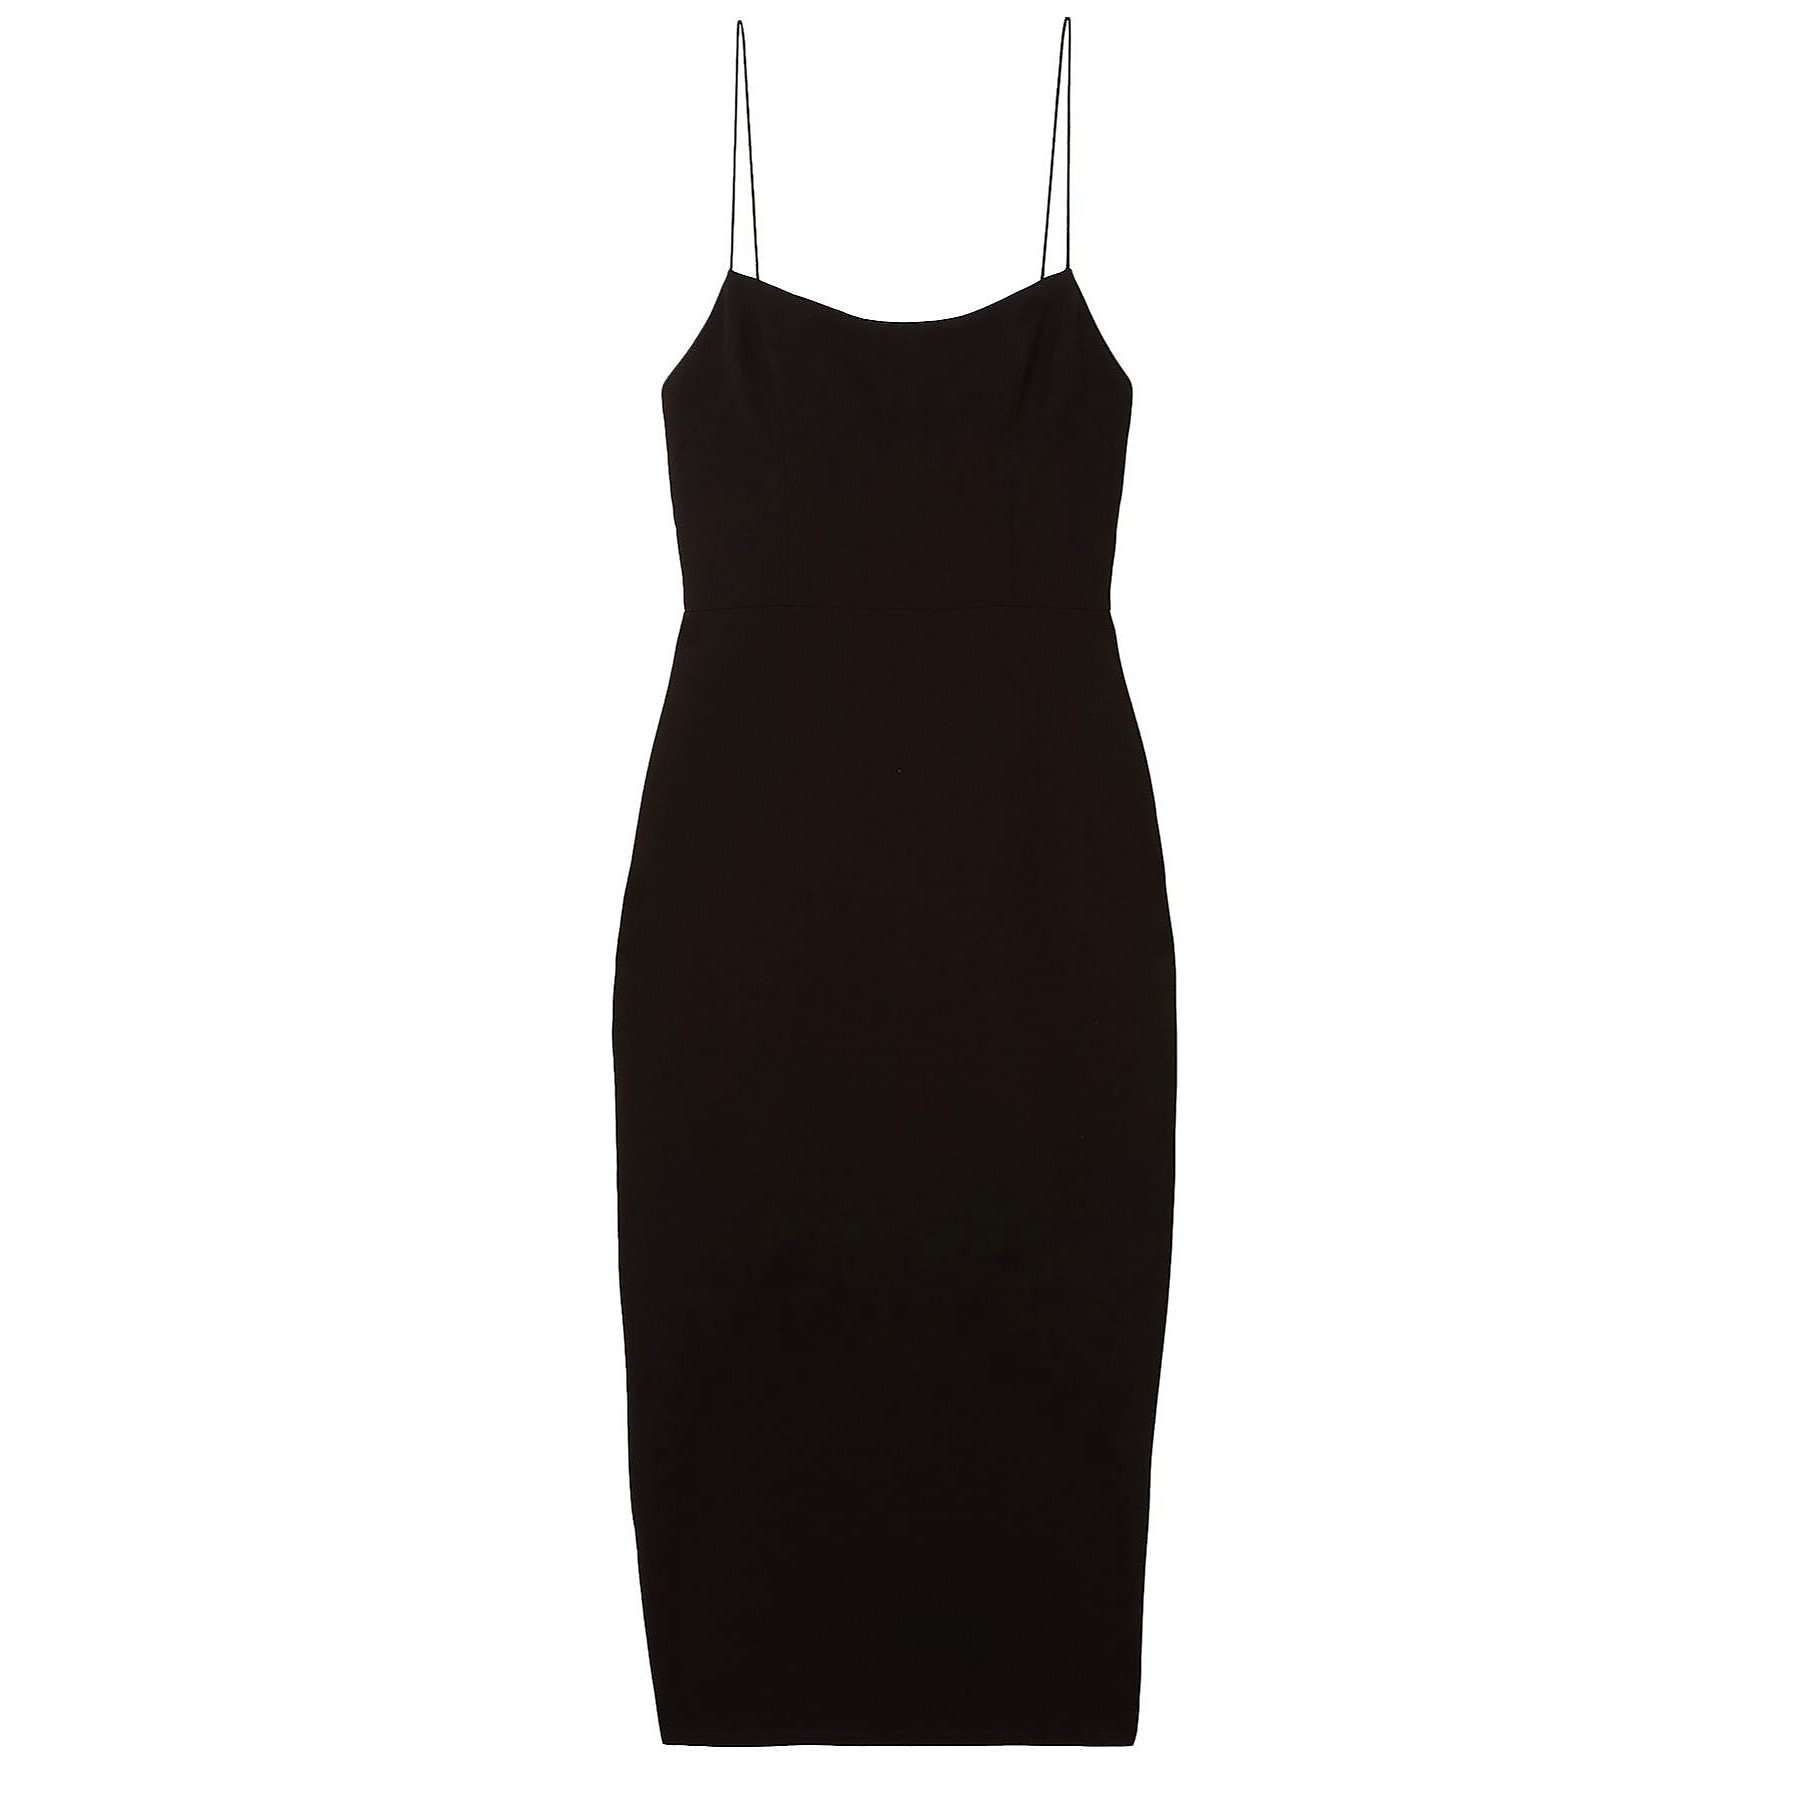 Alex Perry Strappy Crepe Dress